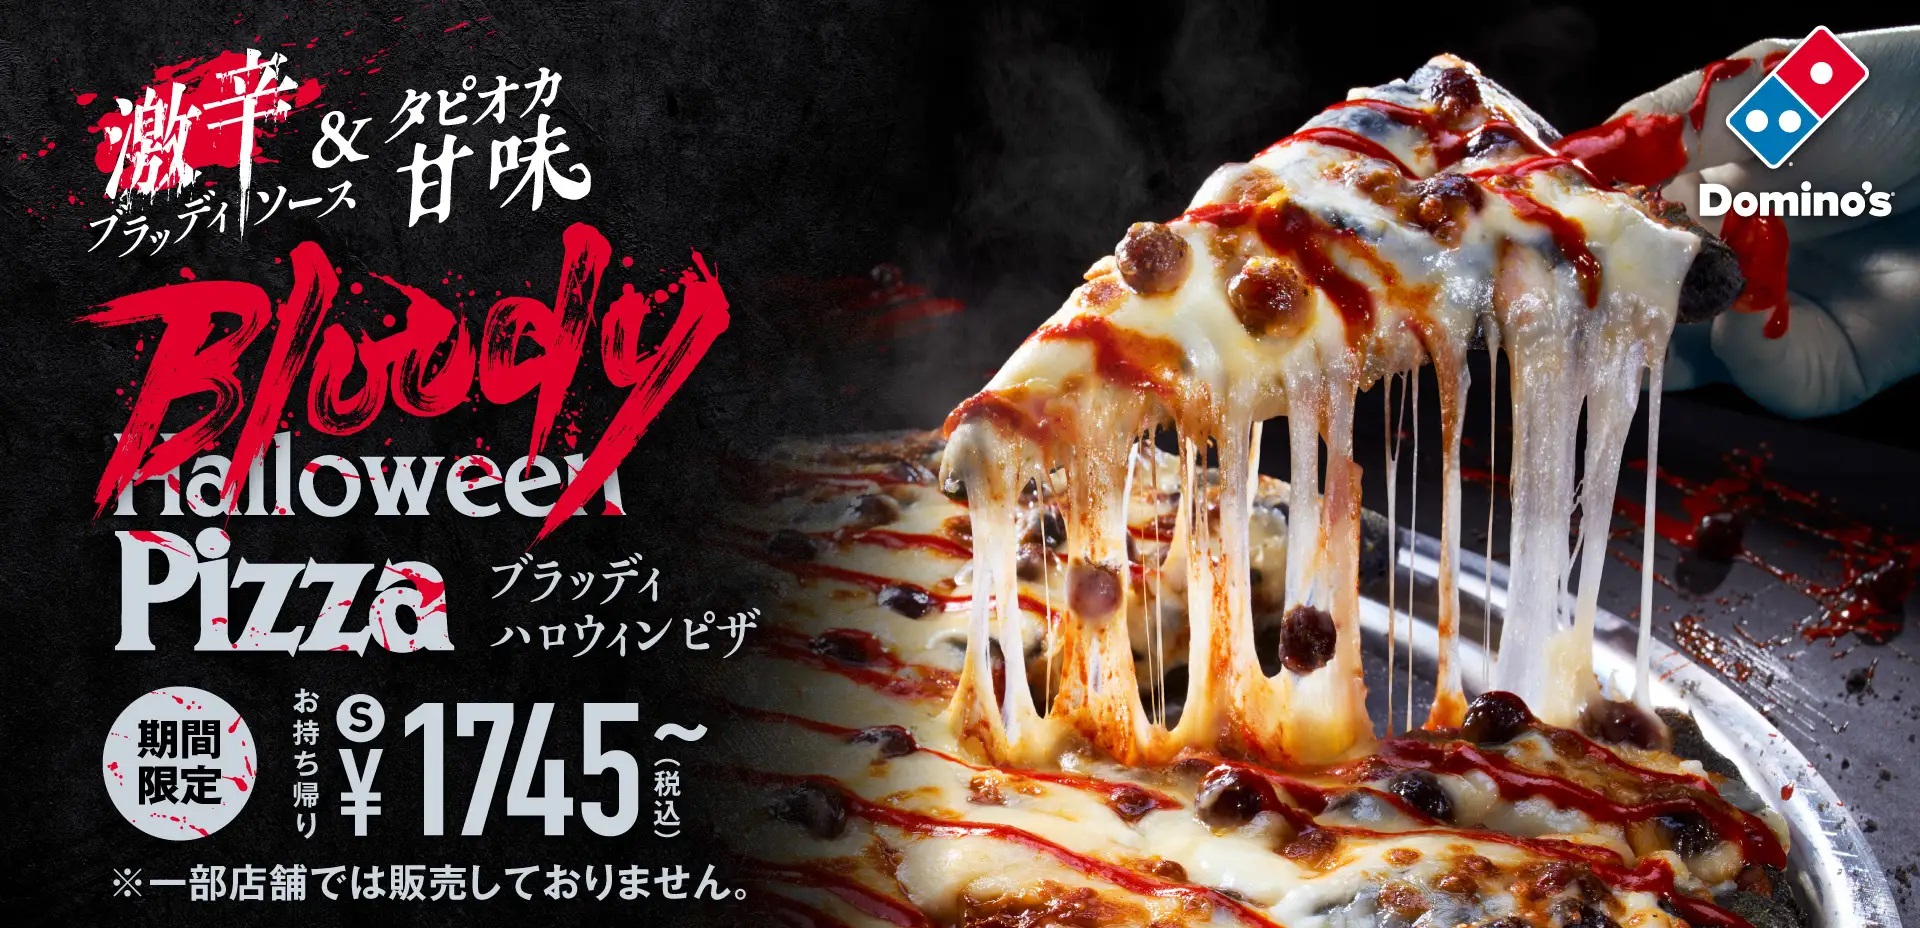 Devil's Crust Bloody Pizza brought to dark life by Domino's Japan